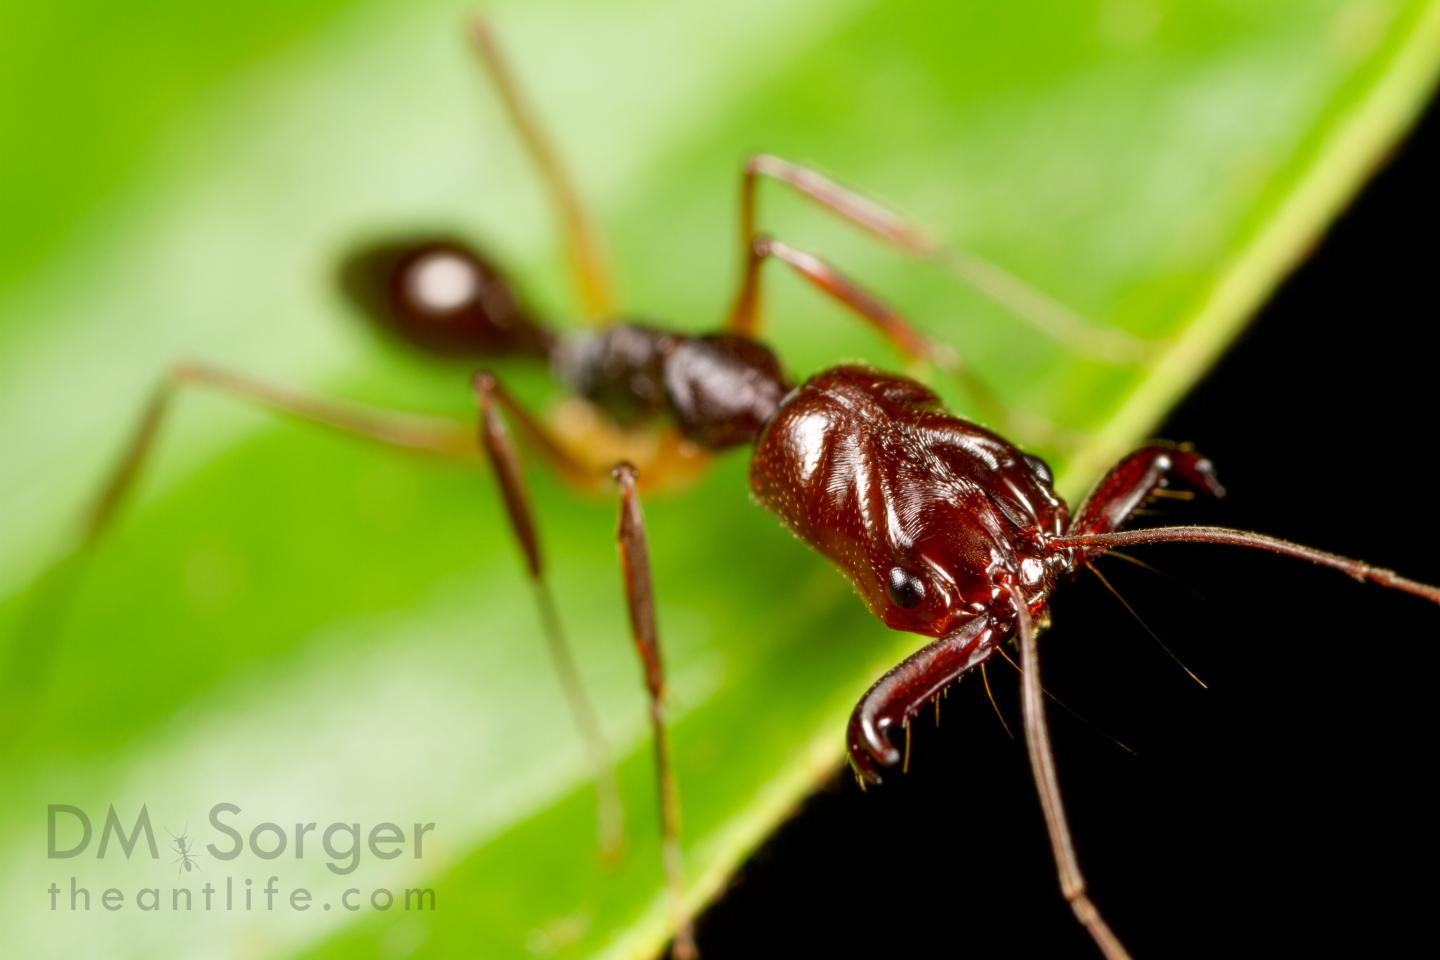 Trap-Jaw Ant Can Jump with either Jaws or Legs